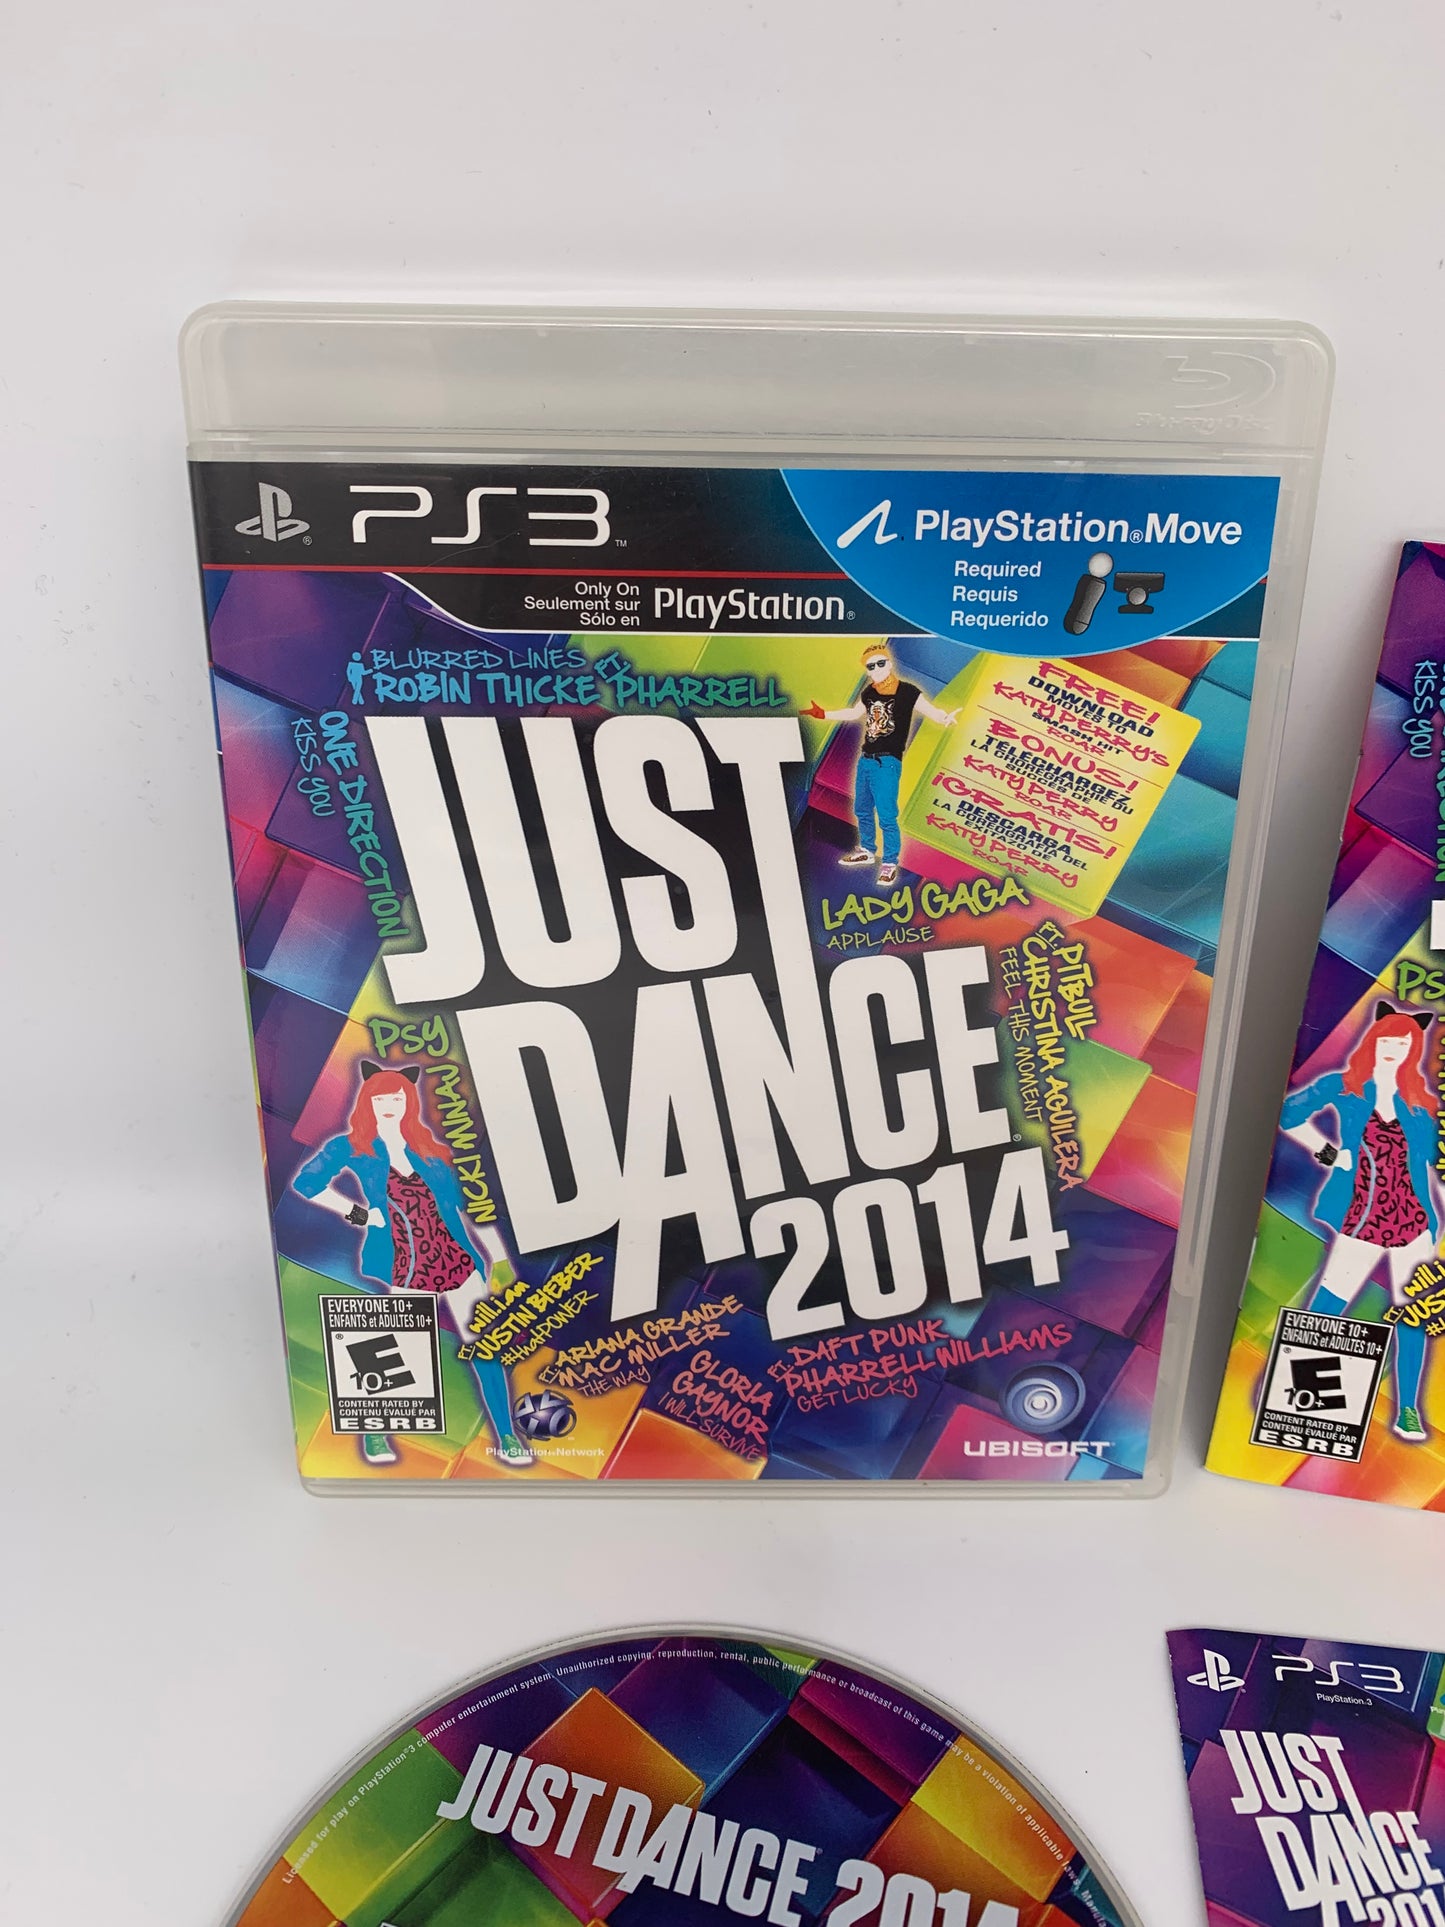 SONY PLAYSTATiON 3 [PS3] | JUST DANCE 2014